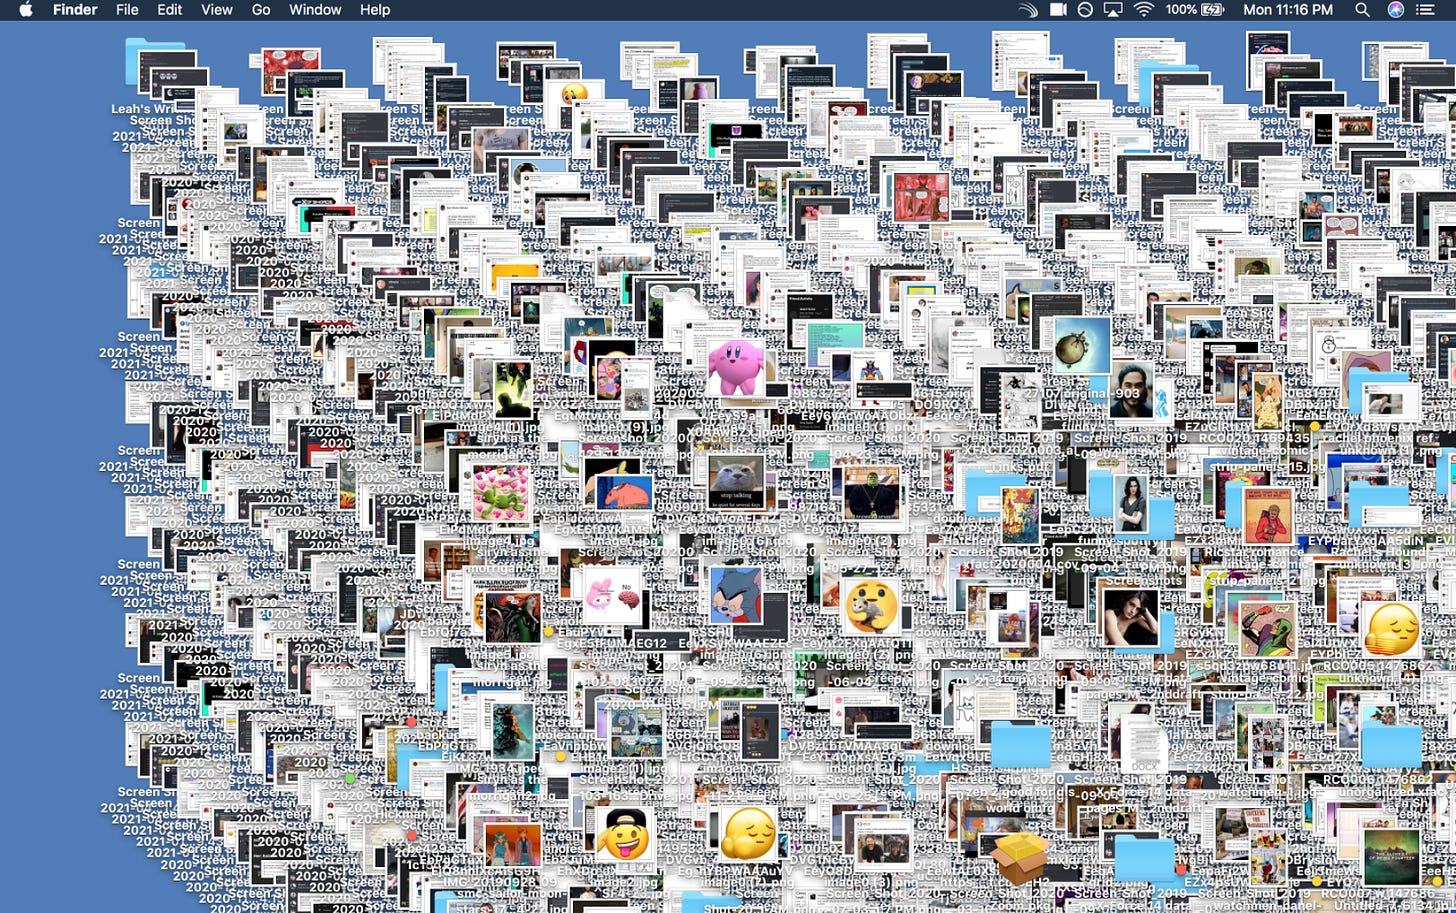 a ludicrously cluttered desktop